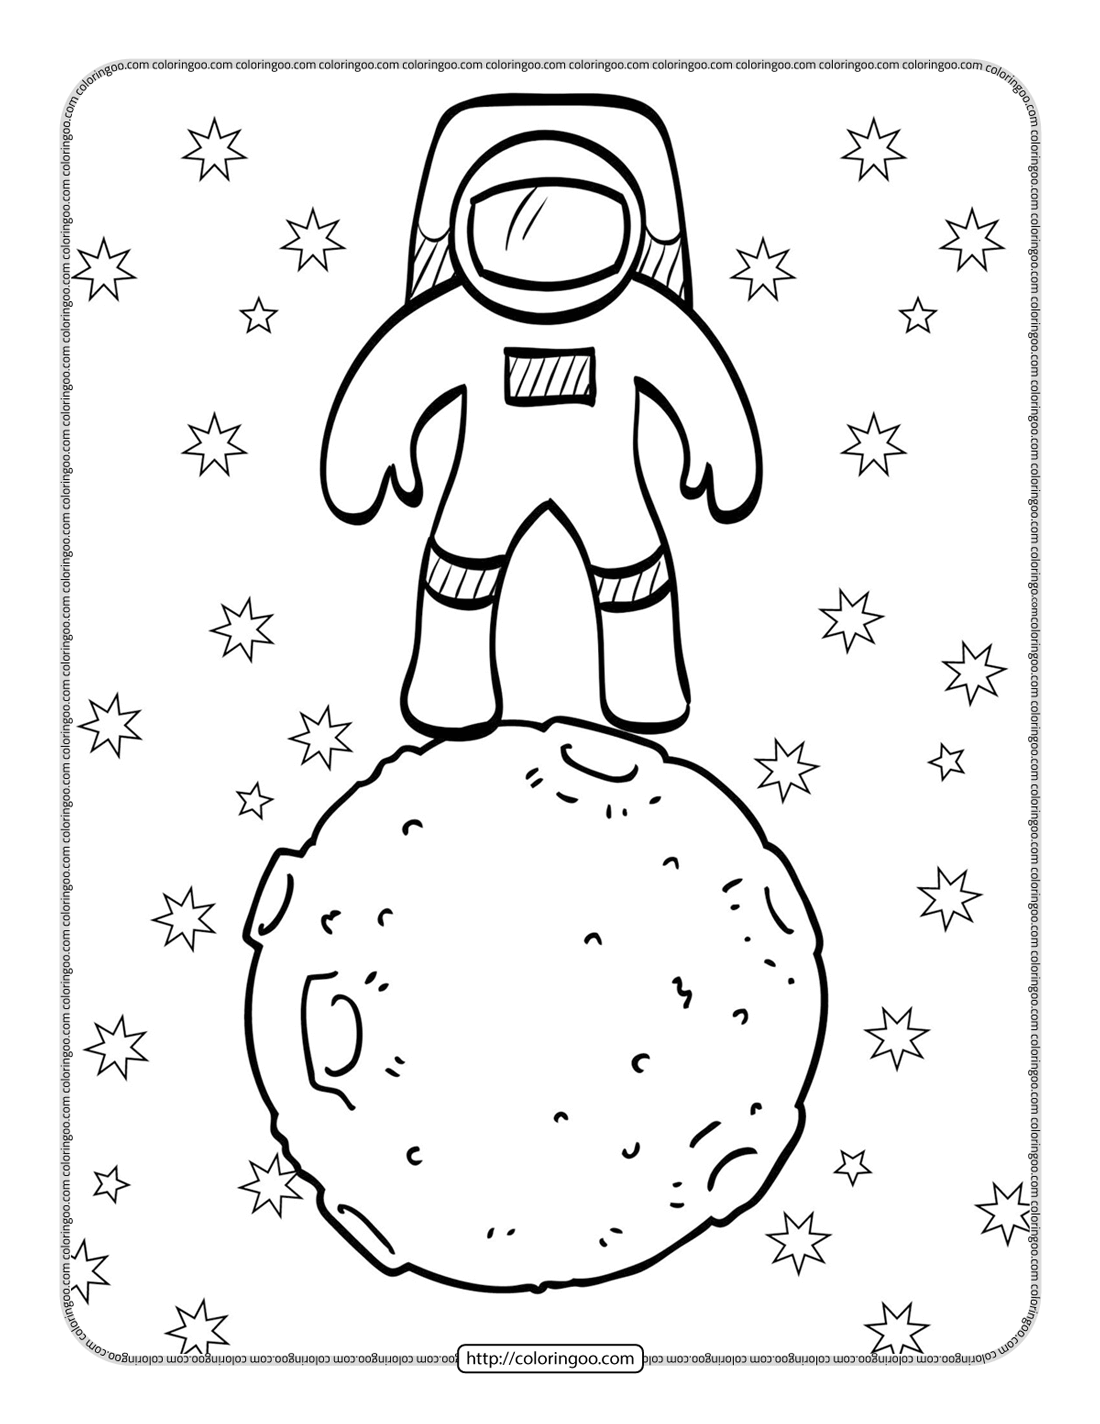 astronaut on the moon coloring page